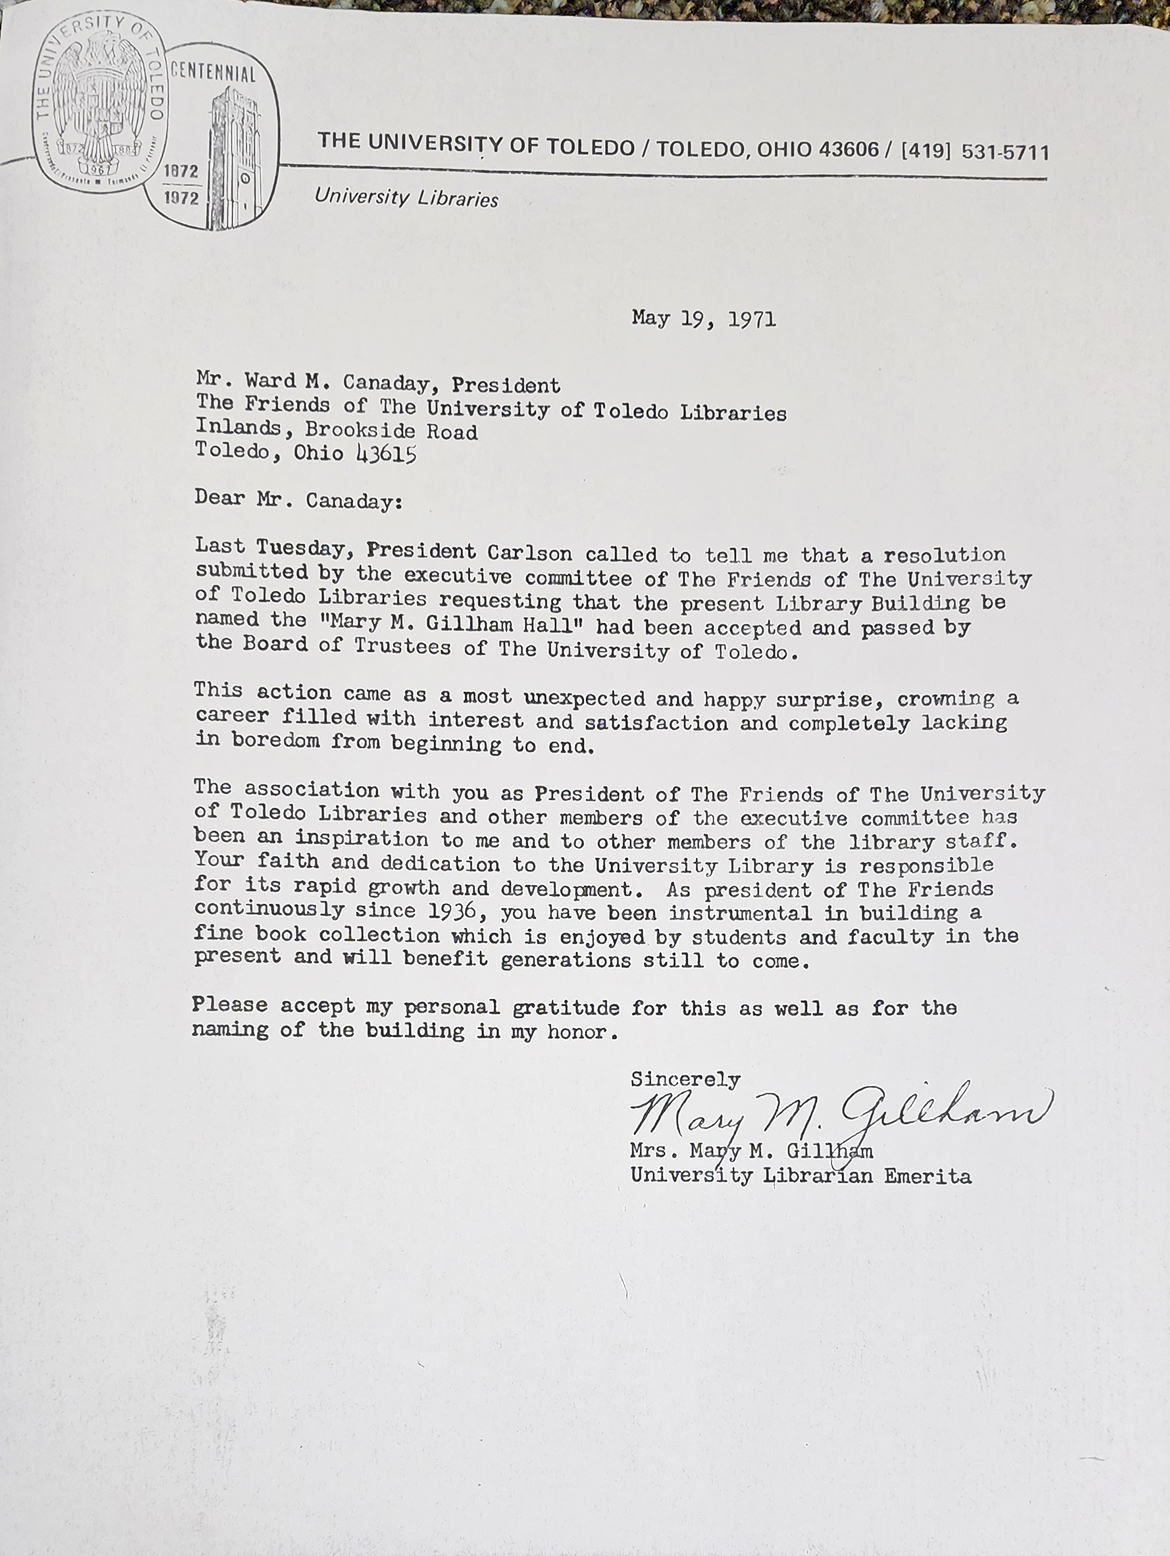 Letter from Mary Gillham to Ward M. Canaday, May 19, 1971